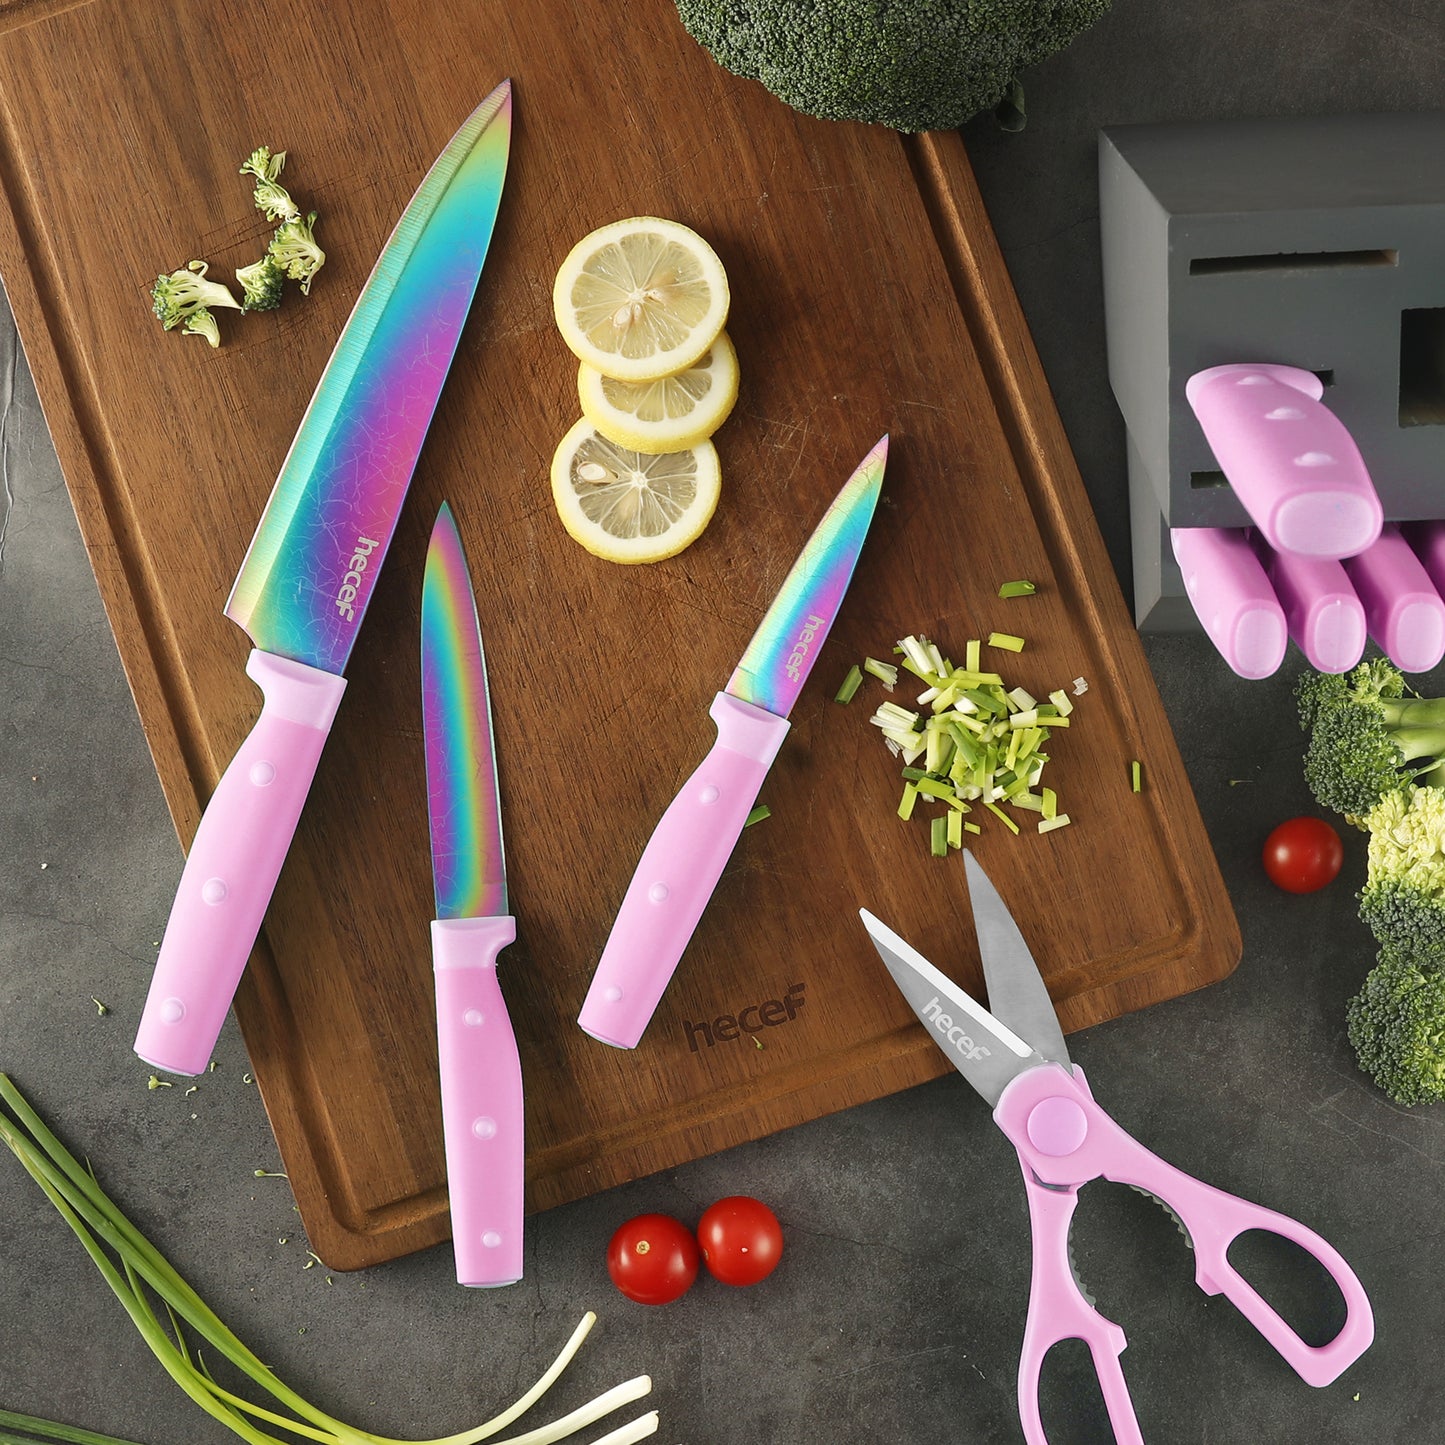 hecef 14 Pieces Knife Set with Block, Rainbow Titanium Knives Set with Laser Pattern, Martensitic Stainless Steel Chef Knife Set with Sharpener, Steak Knife, Scissors(Green) - Hecef Kitchen